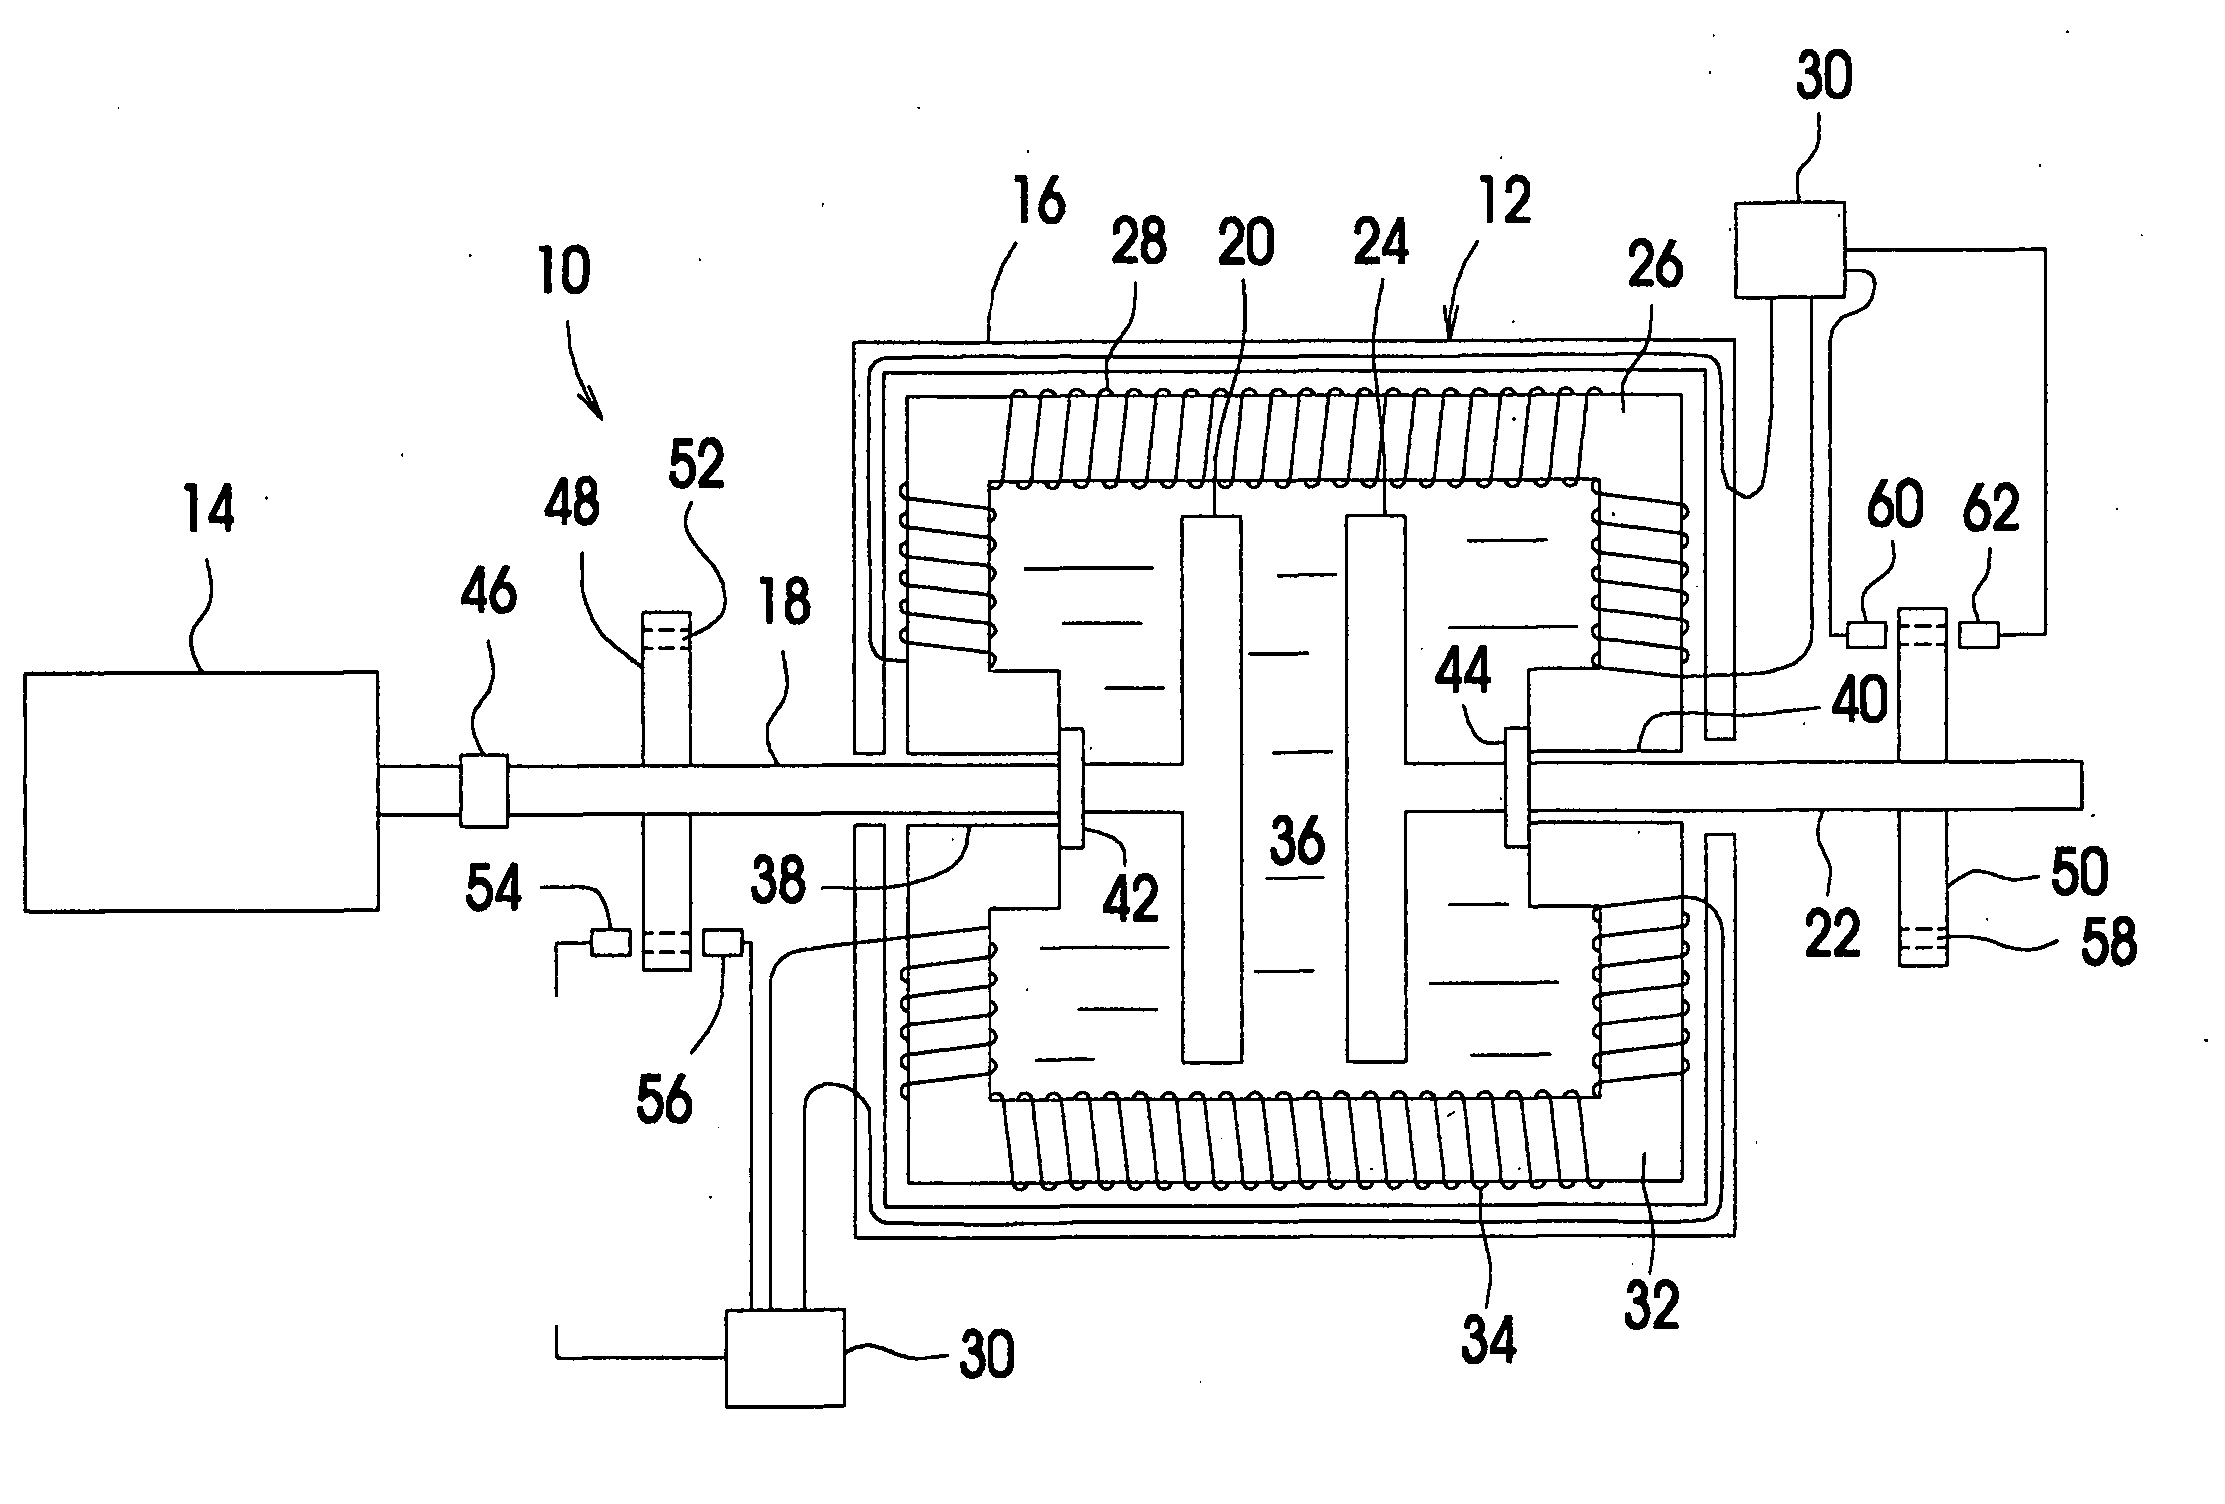 Combined torque measurement and clutch apparatus